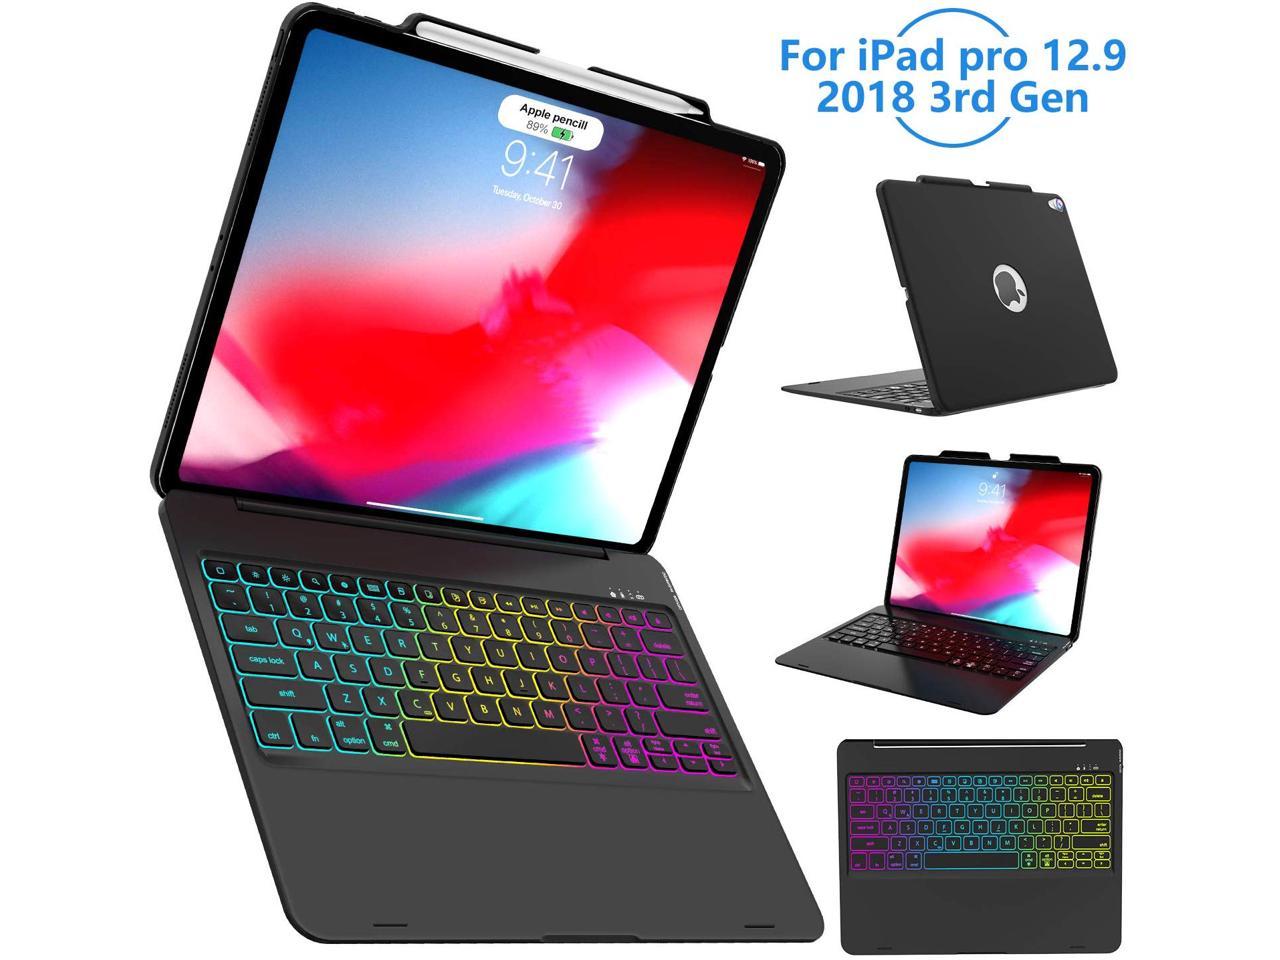 Ipad Pro 12 9 Keyboard Case 18 3rd Gen Support Apple Pencil Charging 7 Color Backlit Wireless Keyboard With 135 Smart Folio Hard Back Cover Ultra Slim Auto Sleep Wake Not For 17 15 Newegg Com